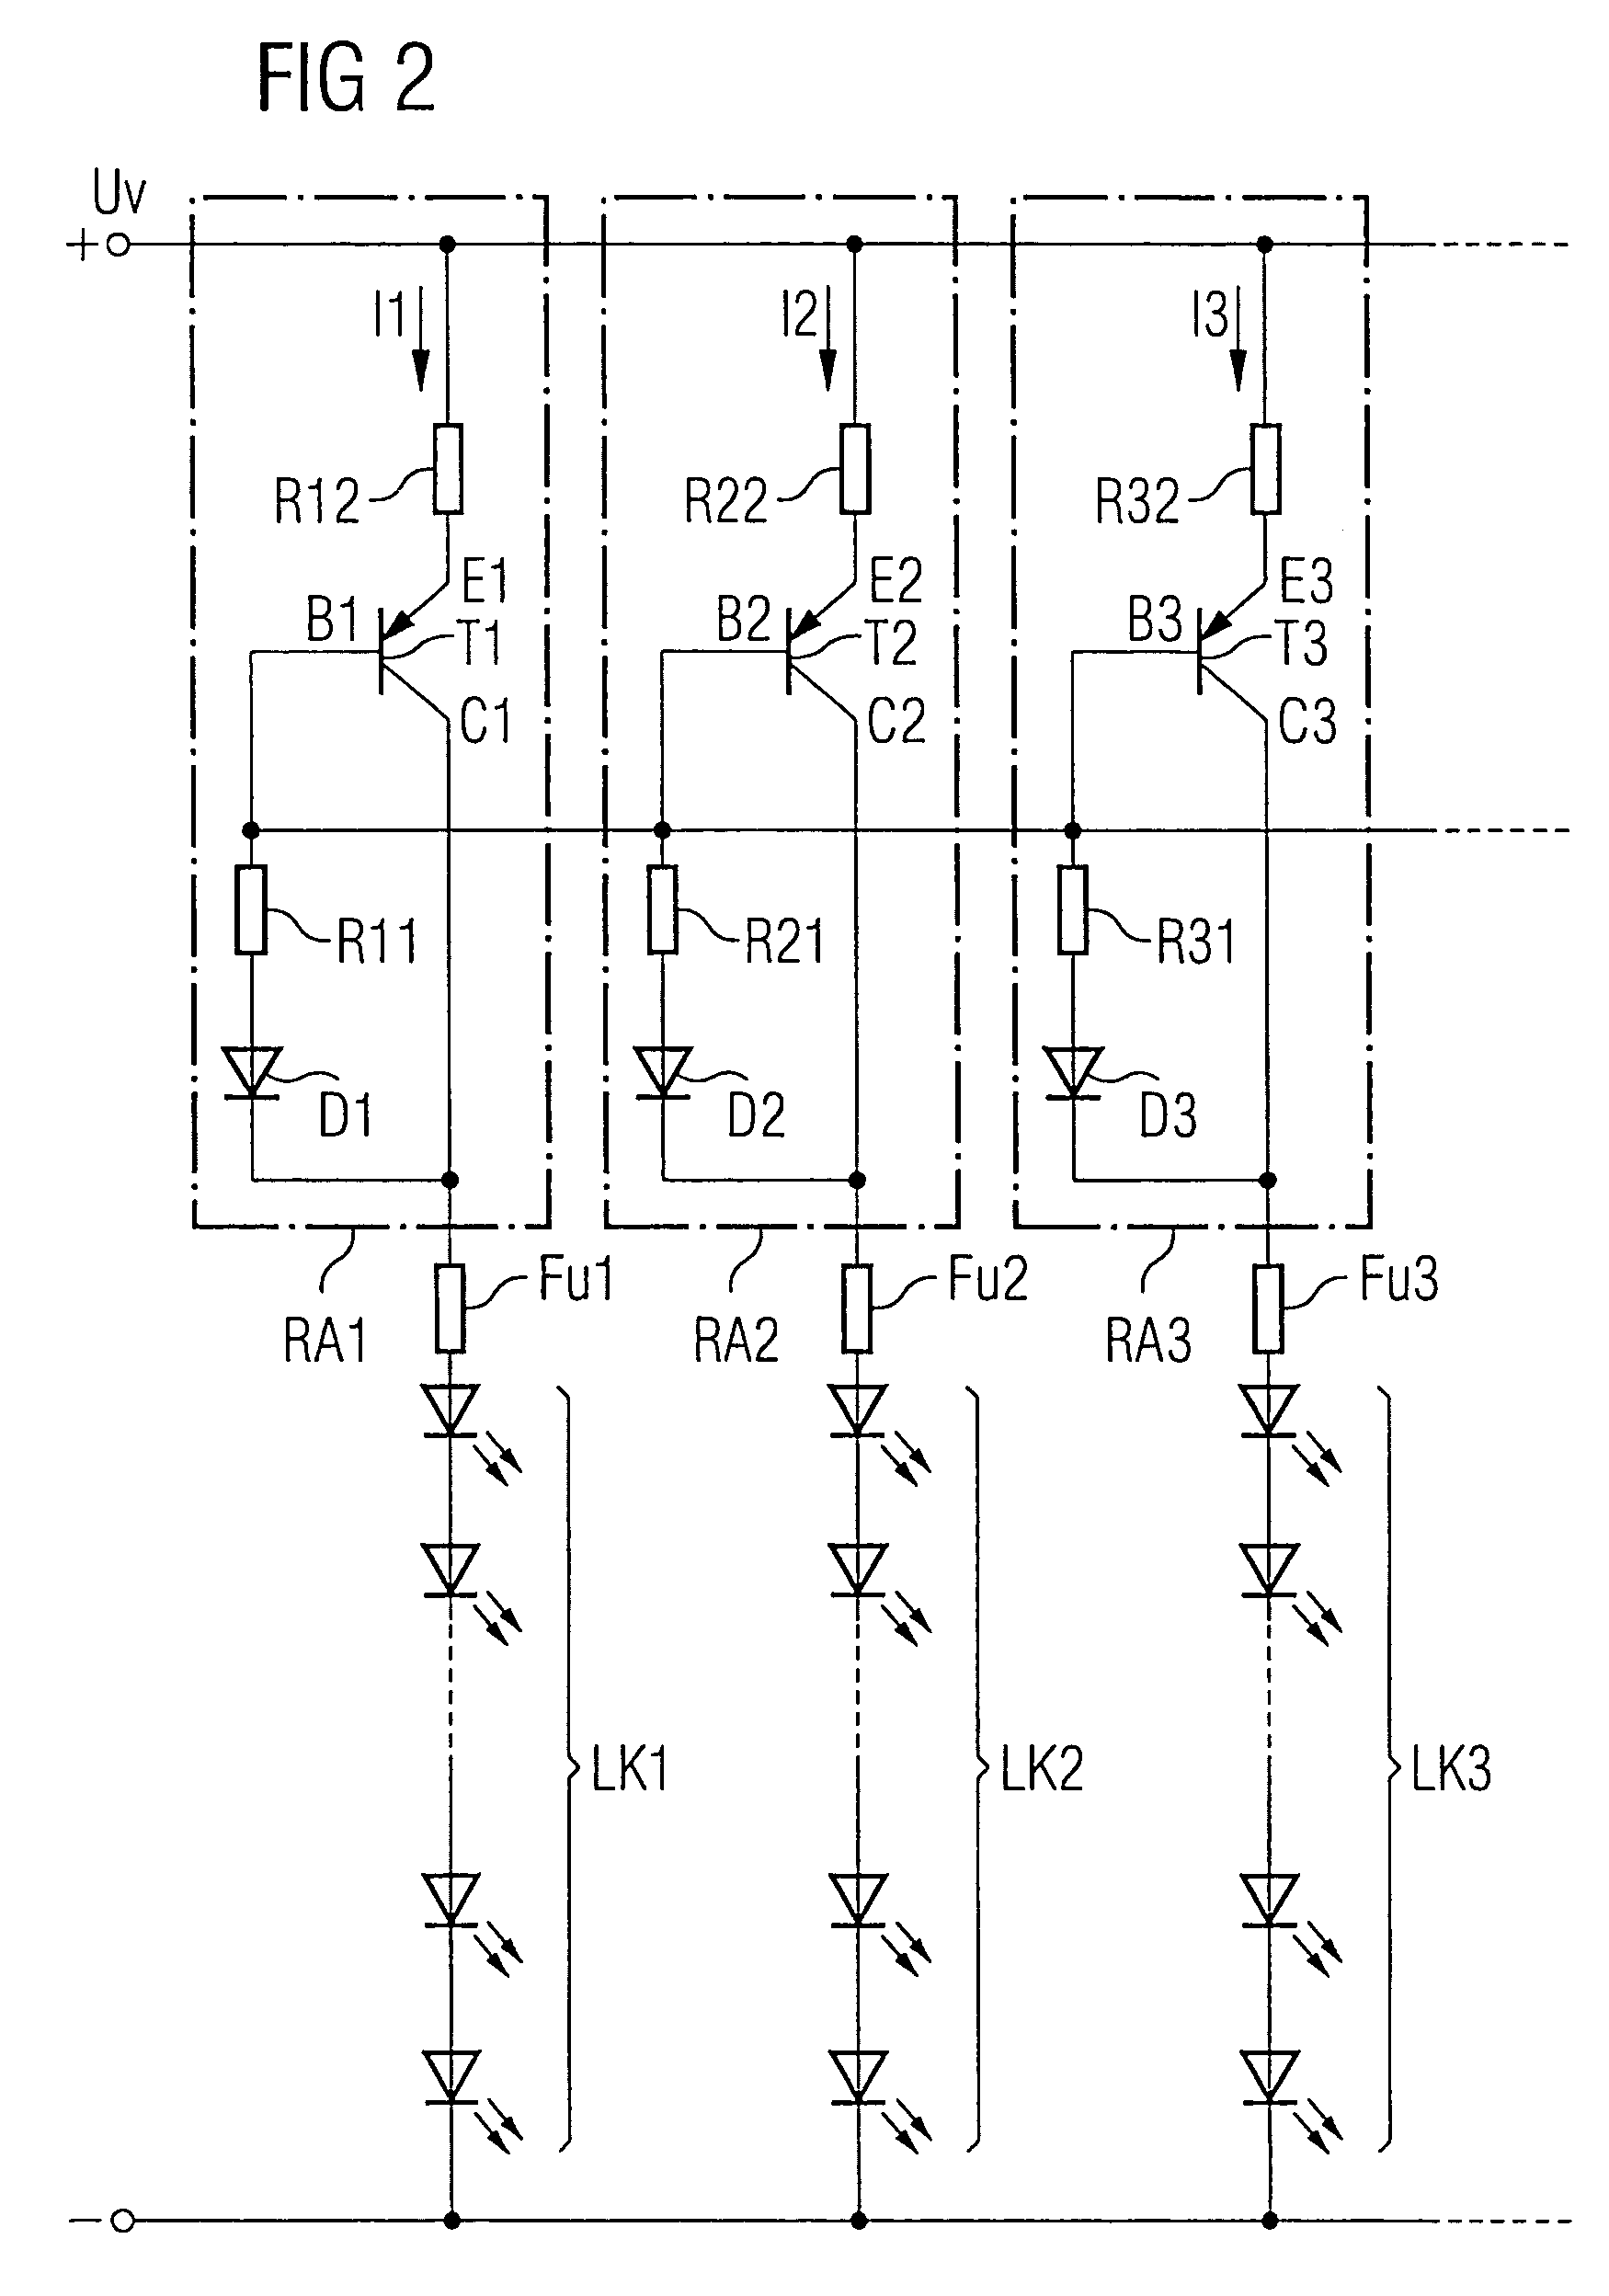 Circuit for an LED array